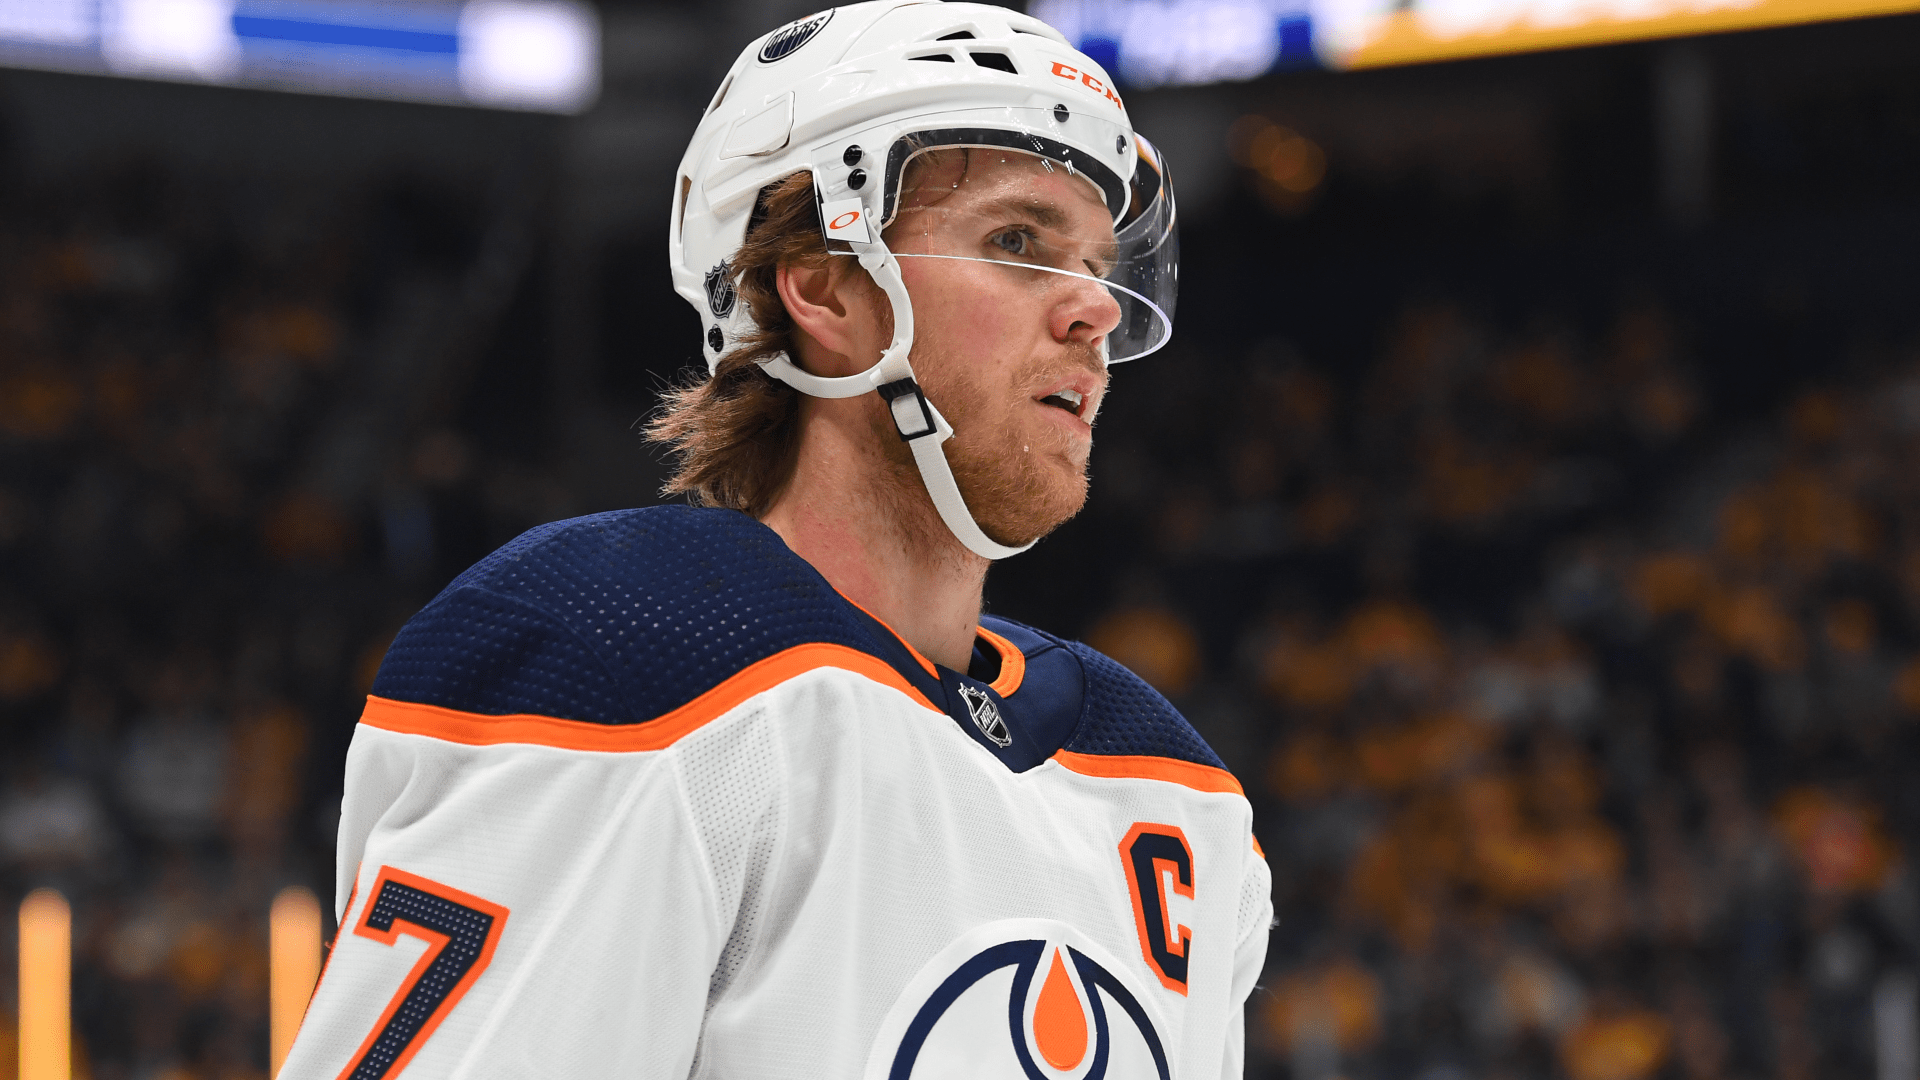 Connor McDavid finds confidence, takes game up a level